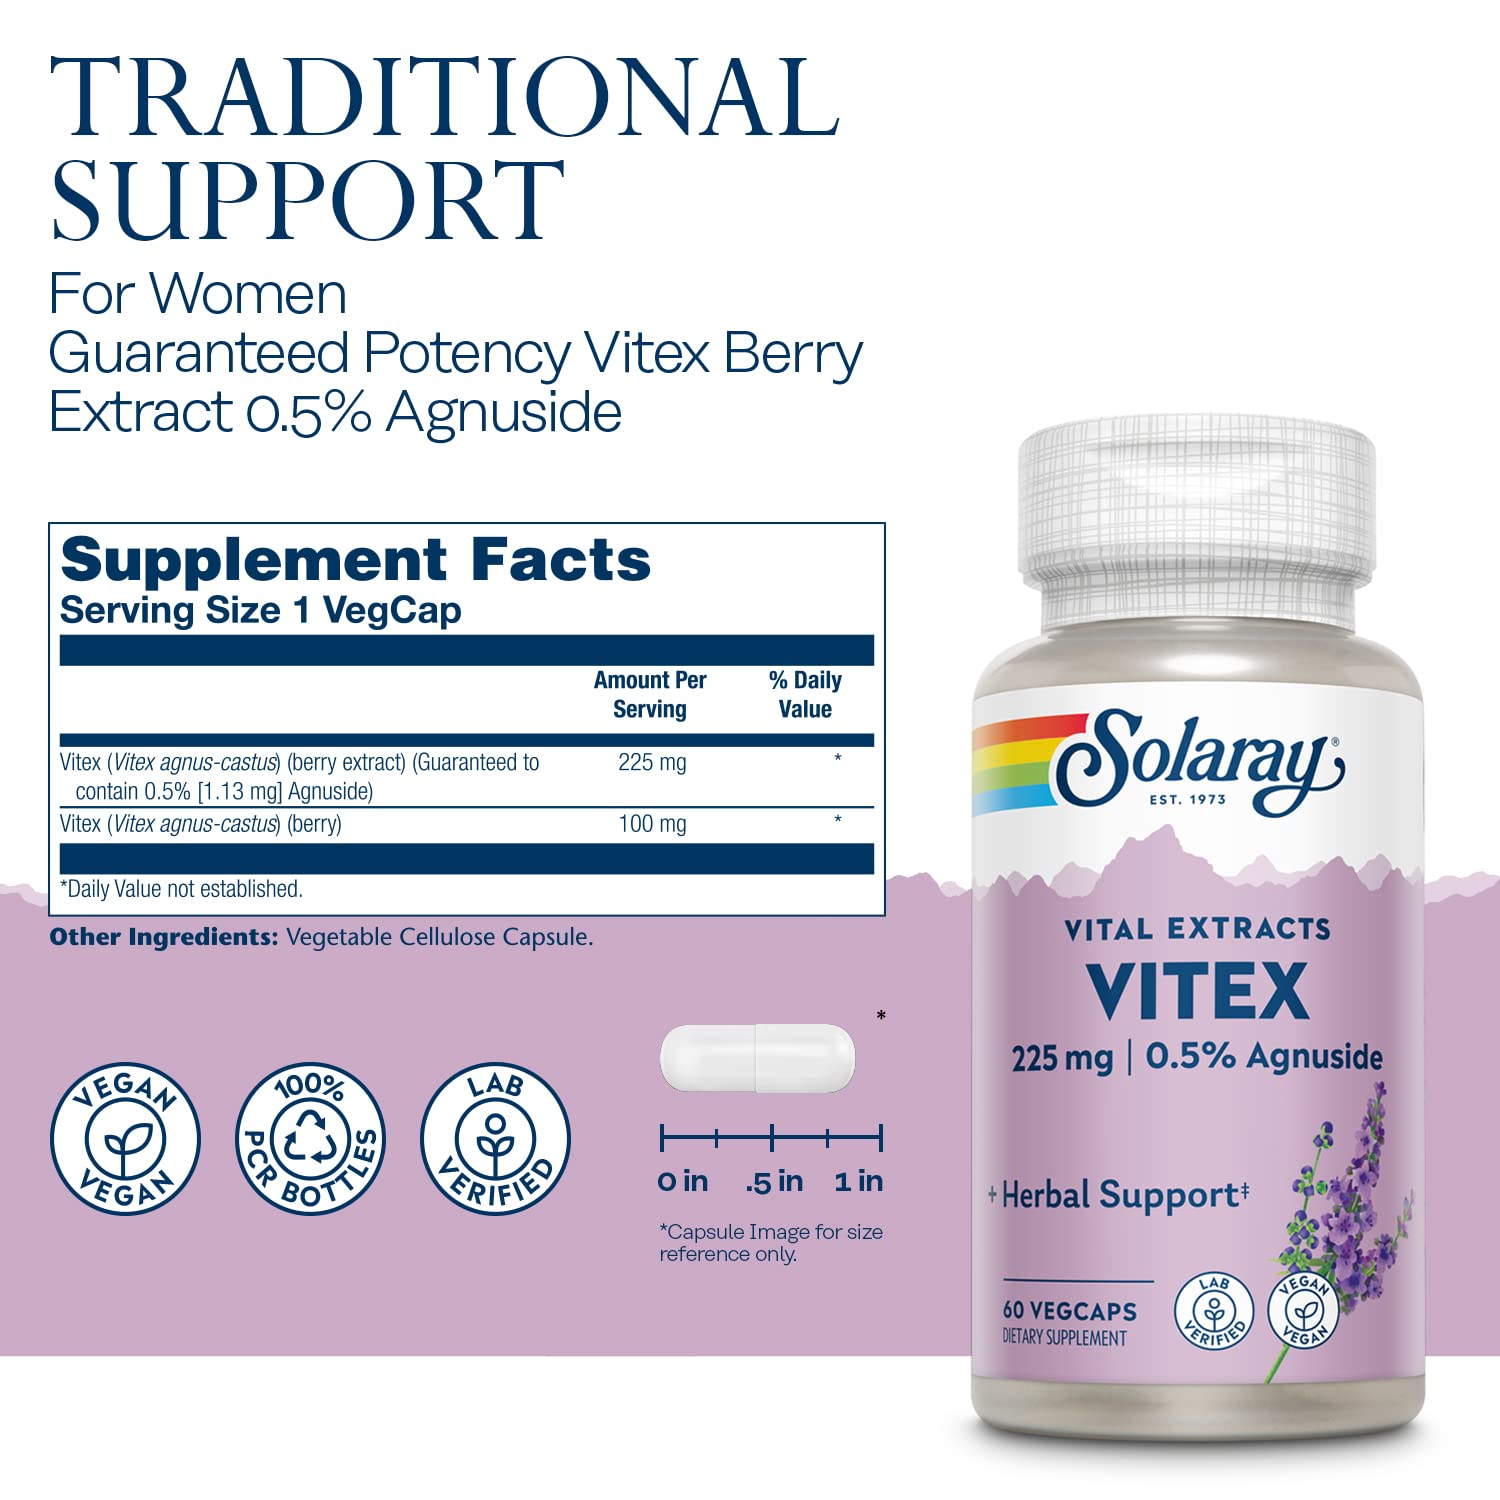 Solaray Vitex Chaste Berry Extract 225mg | Traditional Women's Health Support Supplement | Contains .5% Agnuside | Non-GMO | Vegan | 60 VegCaps